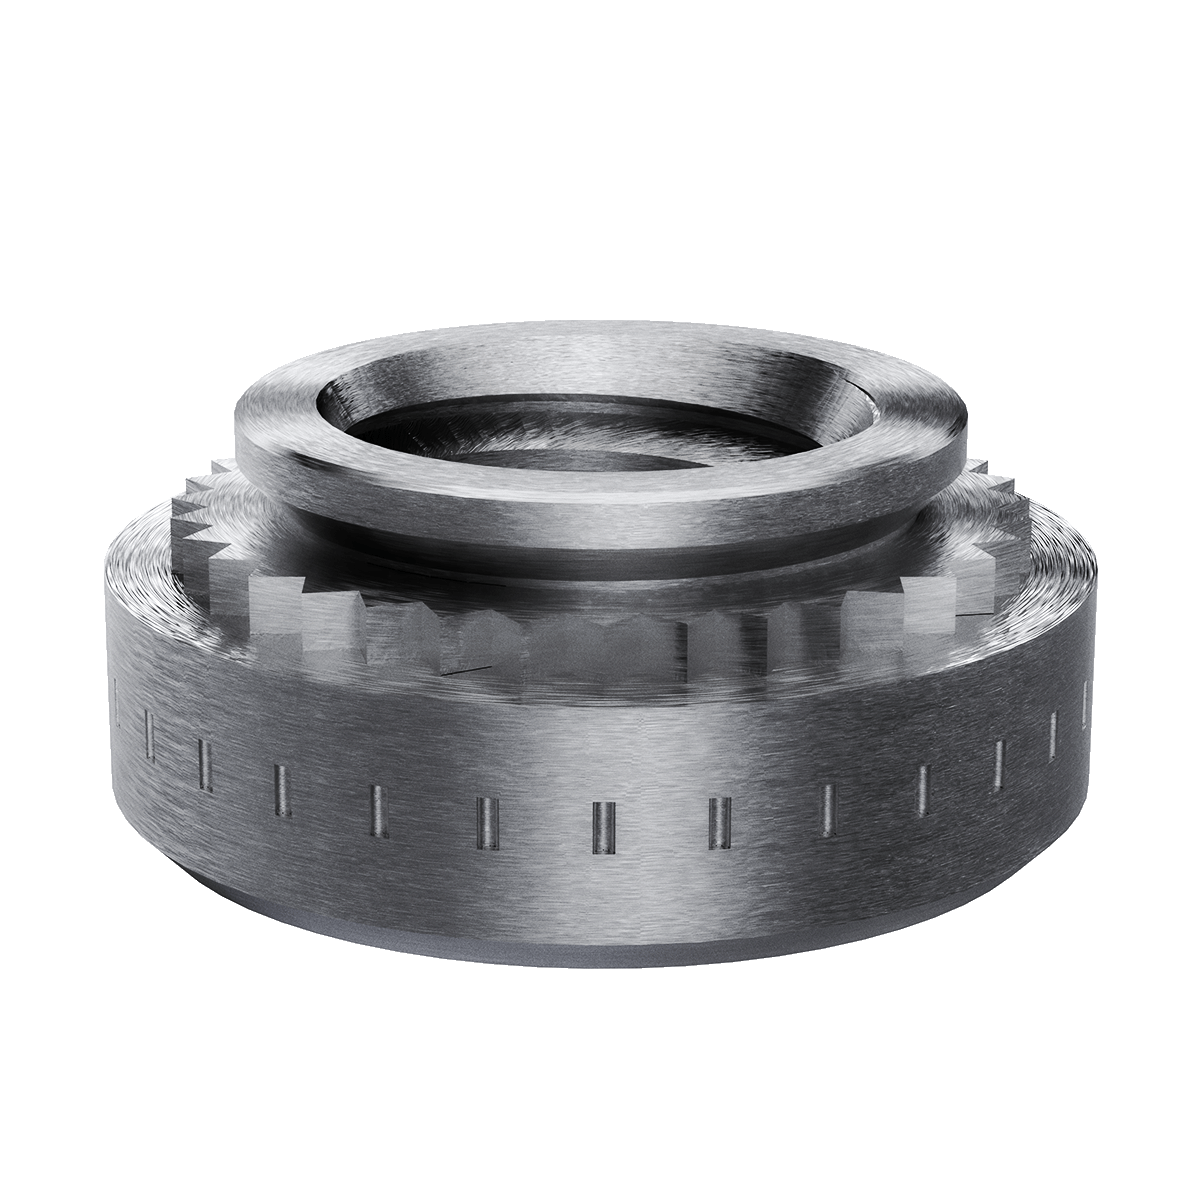 Self-Clinching Nut, For SS, 17-4 Stainless Steel, Passivated, Metric, M4x0.7 x 0, 100 Pack